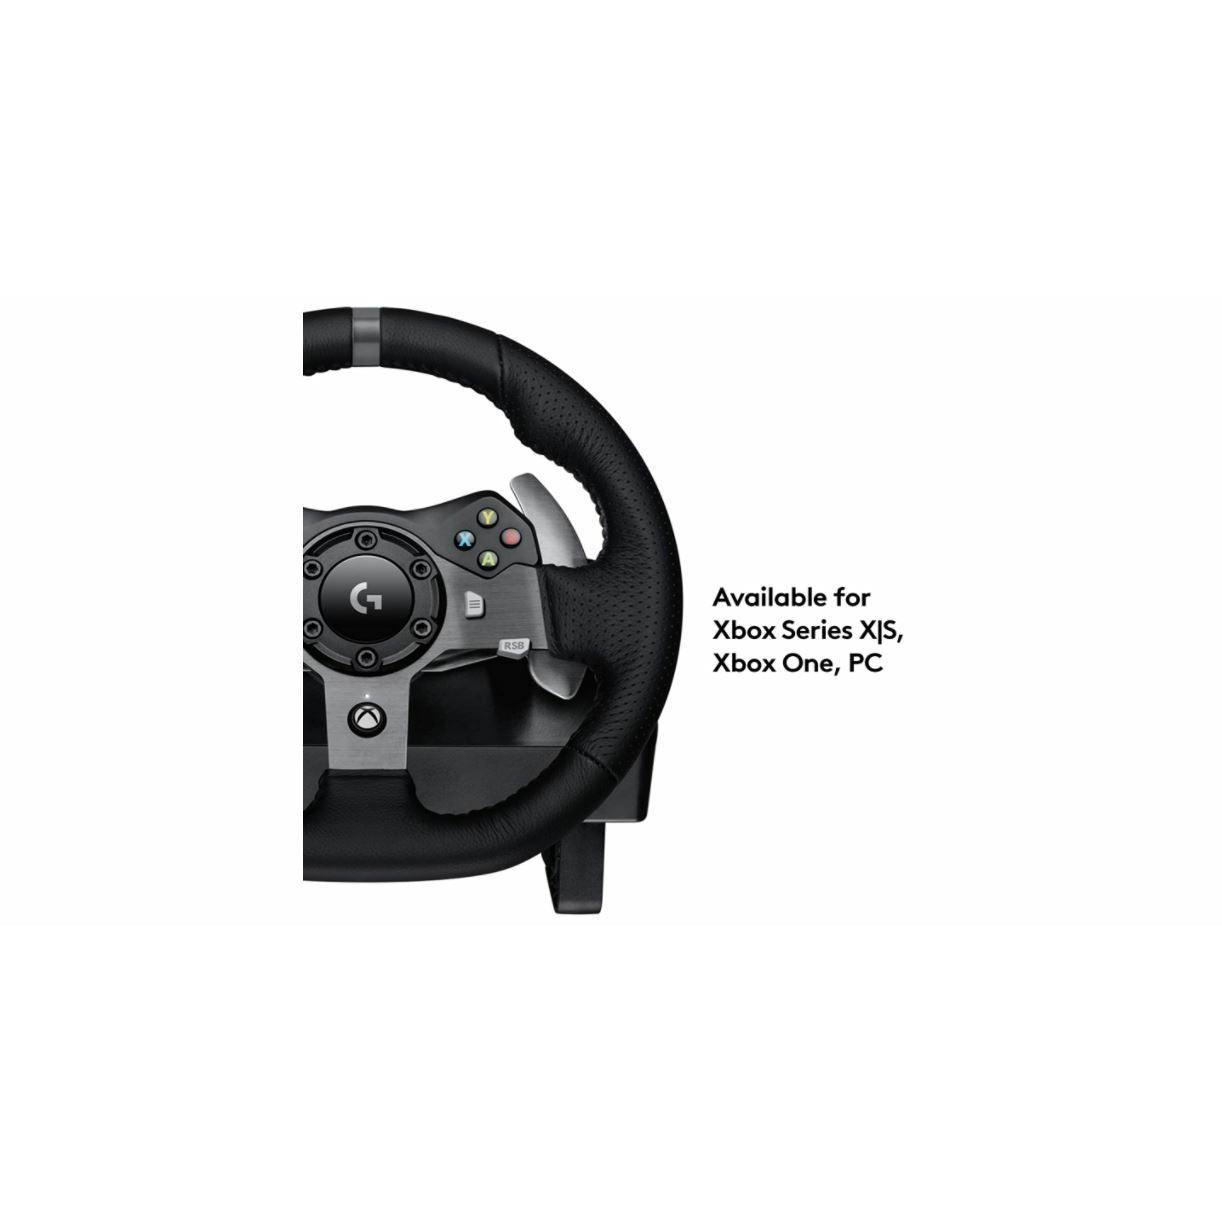 Logitech G920 Driving Force Racing Wheel and Floor Pedals, for